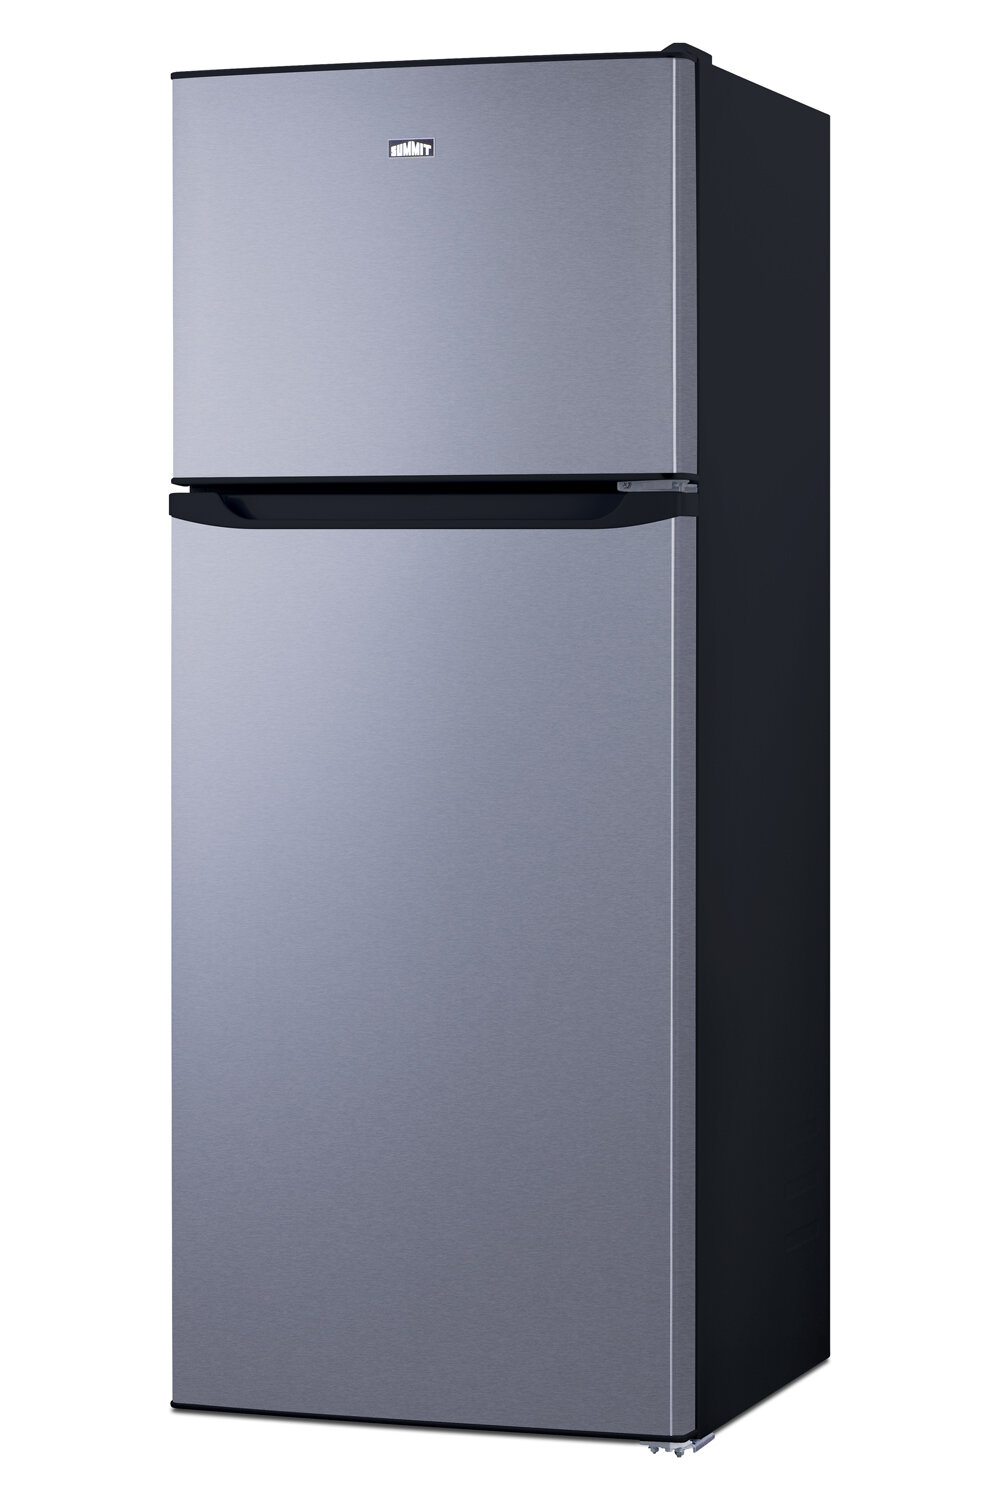 Equator Advanced Appliances Conserv 18 cu.ft. Classic Retro Refrigerator  with Factory Installed Ice Maker